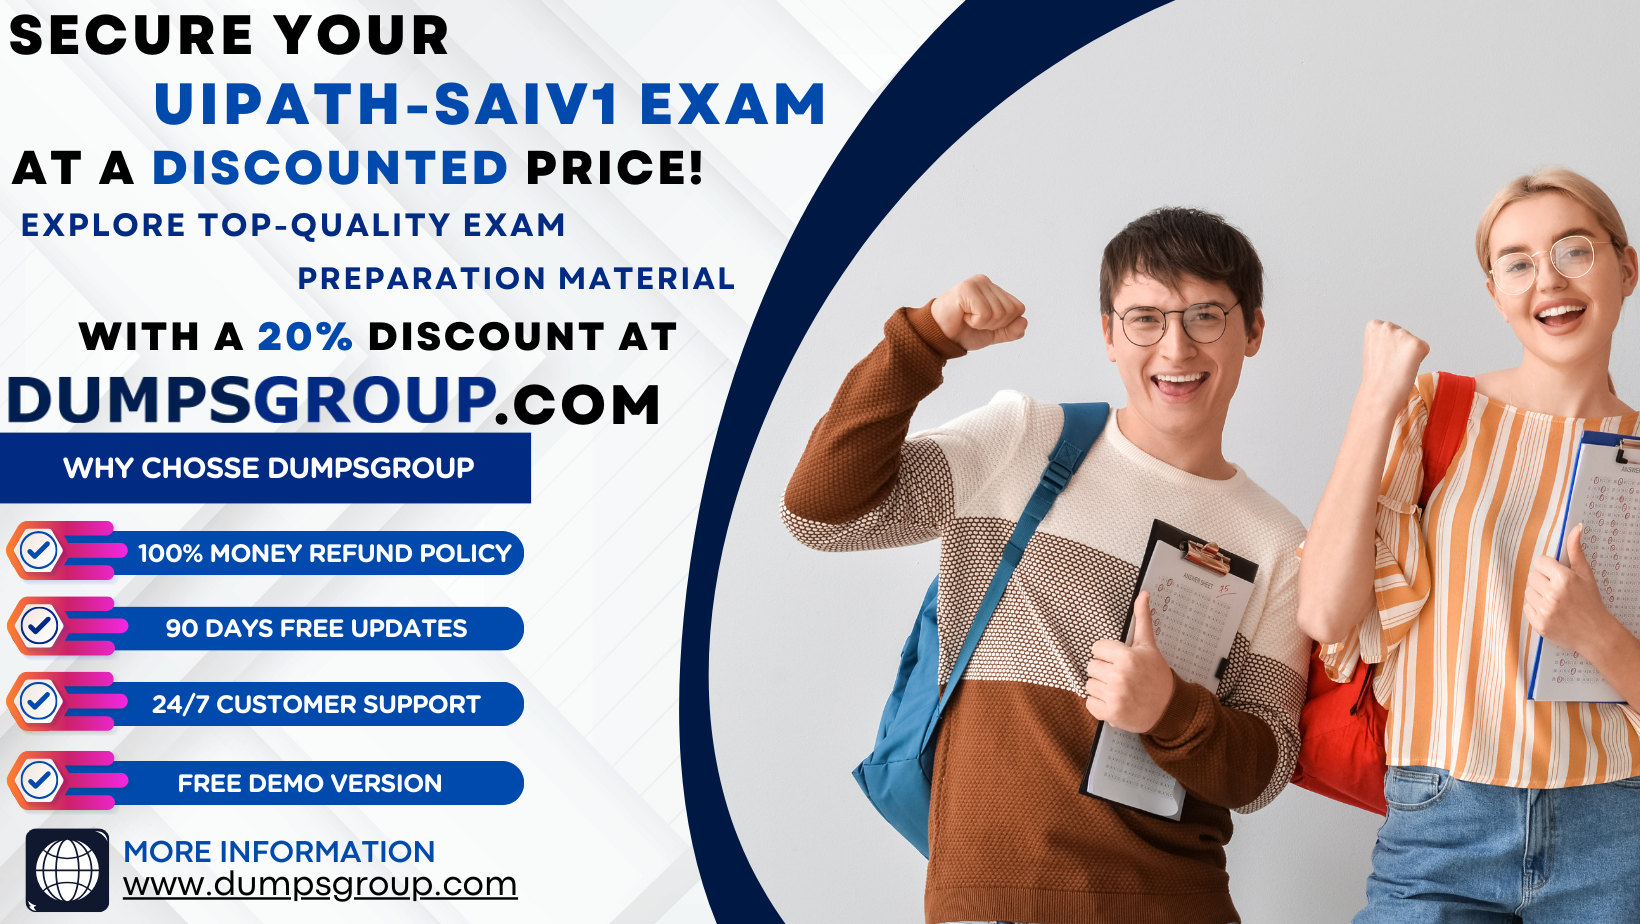 Attachment Special Offer Alert 20% Discount on UiPath-SAIv1 Exam Guides at DumpsGroup.com.png